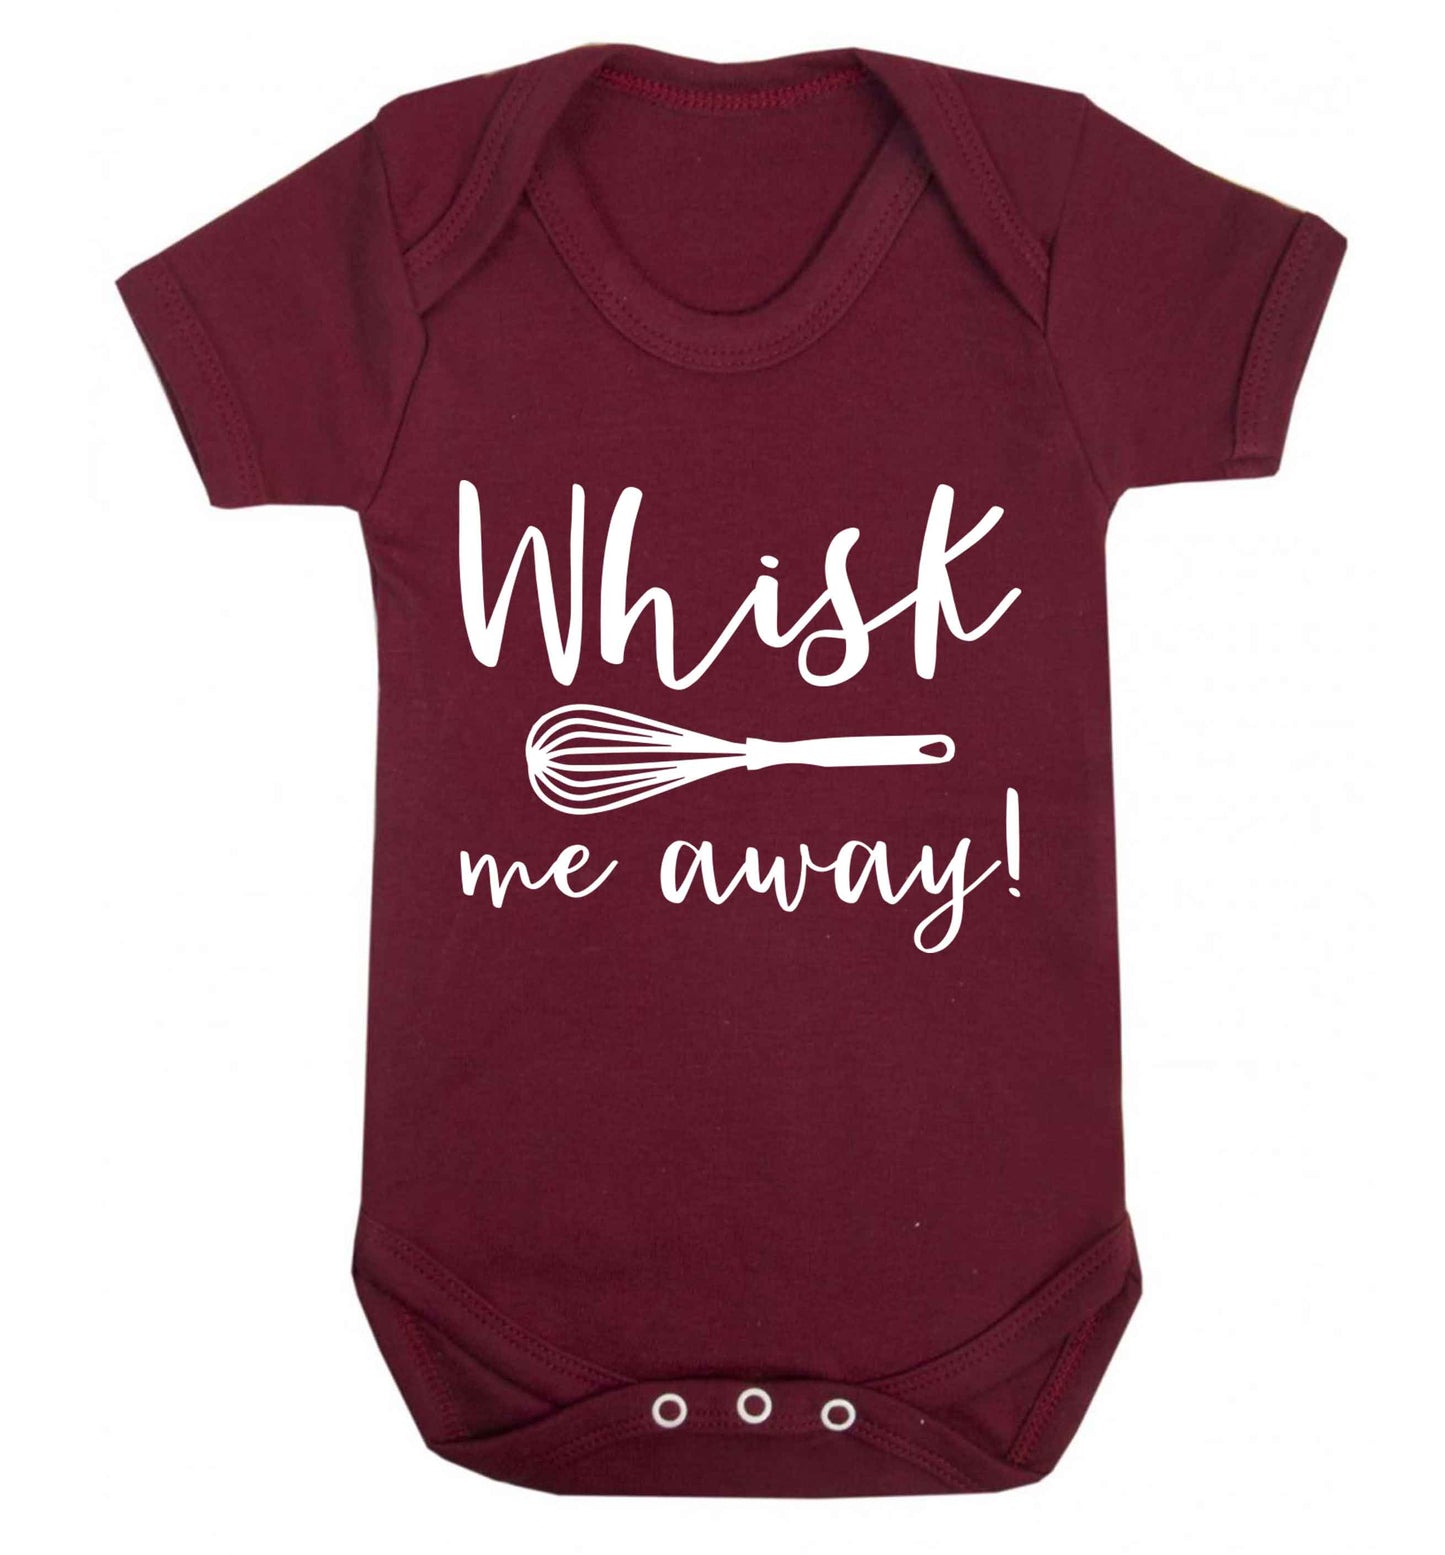 Whisk me away Baby Vest maroon 18-24 months